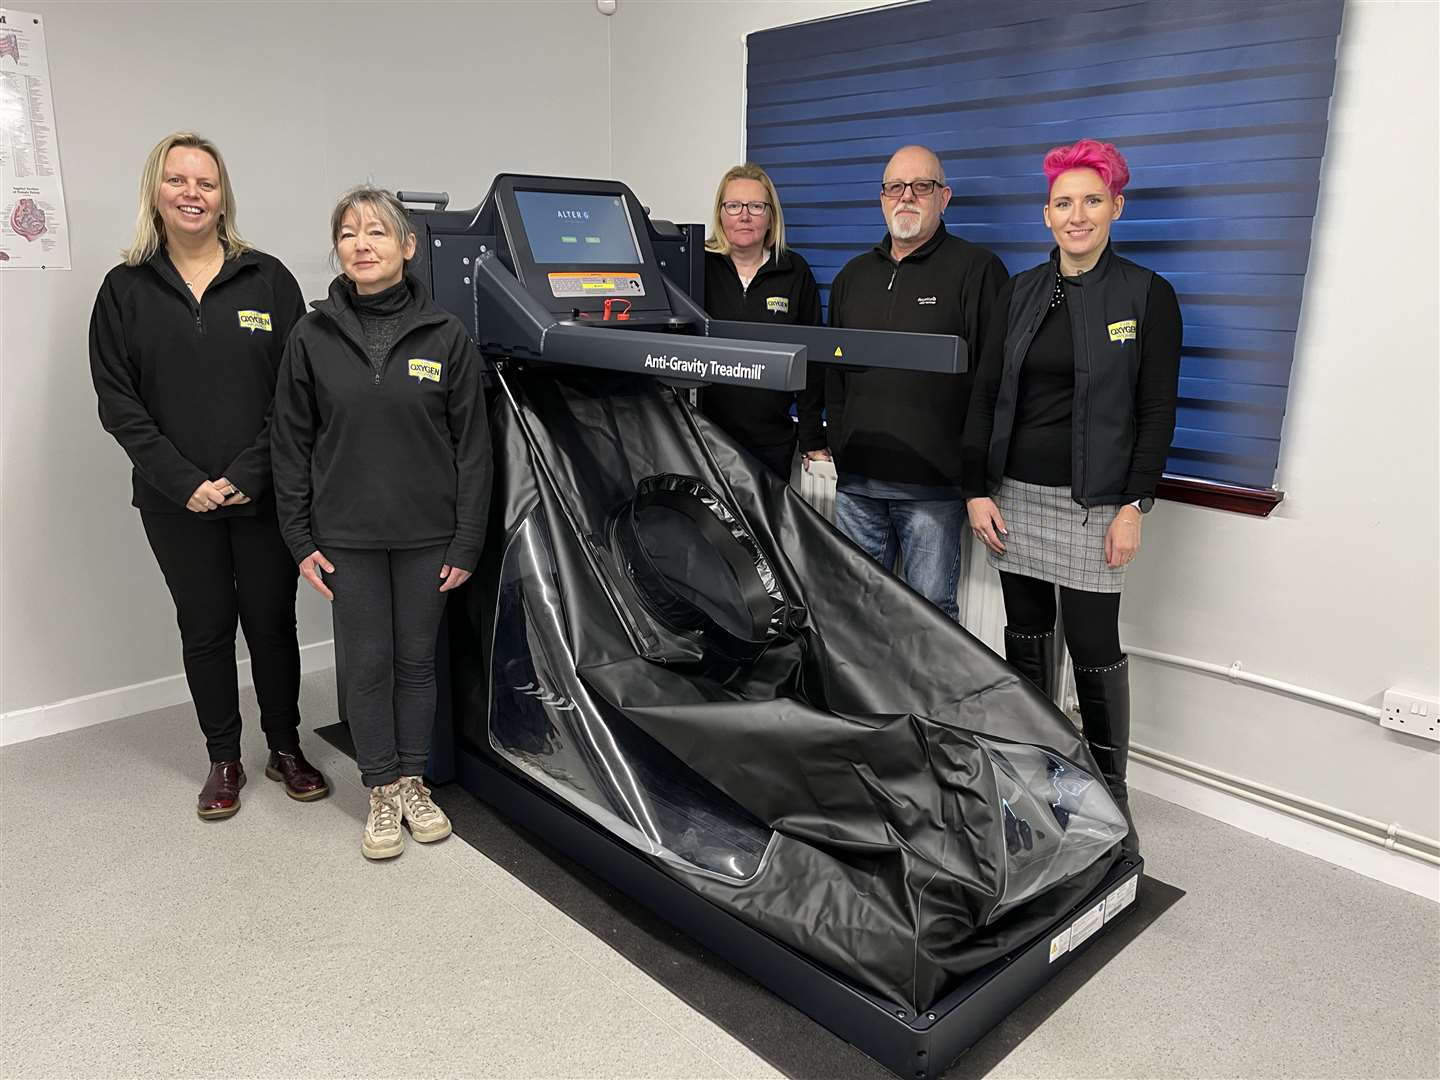 The anti-gravity treadmill at The Oxygen Works in Inverness. From left, operations manager Jenni Donnelly, senior centre assistant Kazia Jarzymowska, centre assistants Nichola Douglas and Grahame MacDonald, and chief executive Leigh-Ann Little.